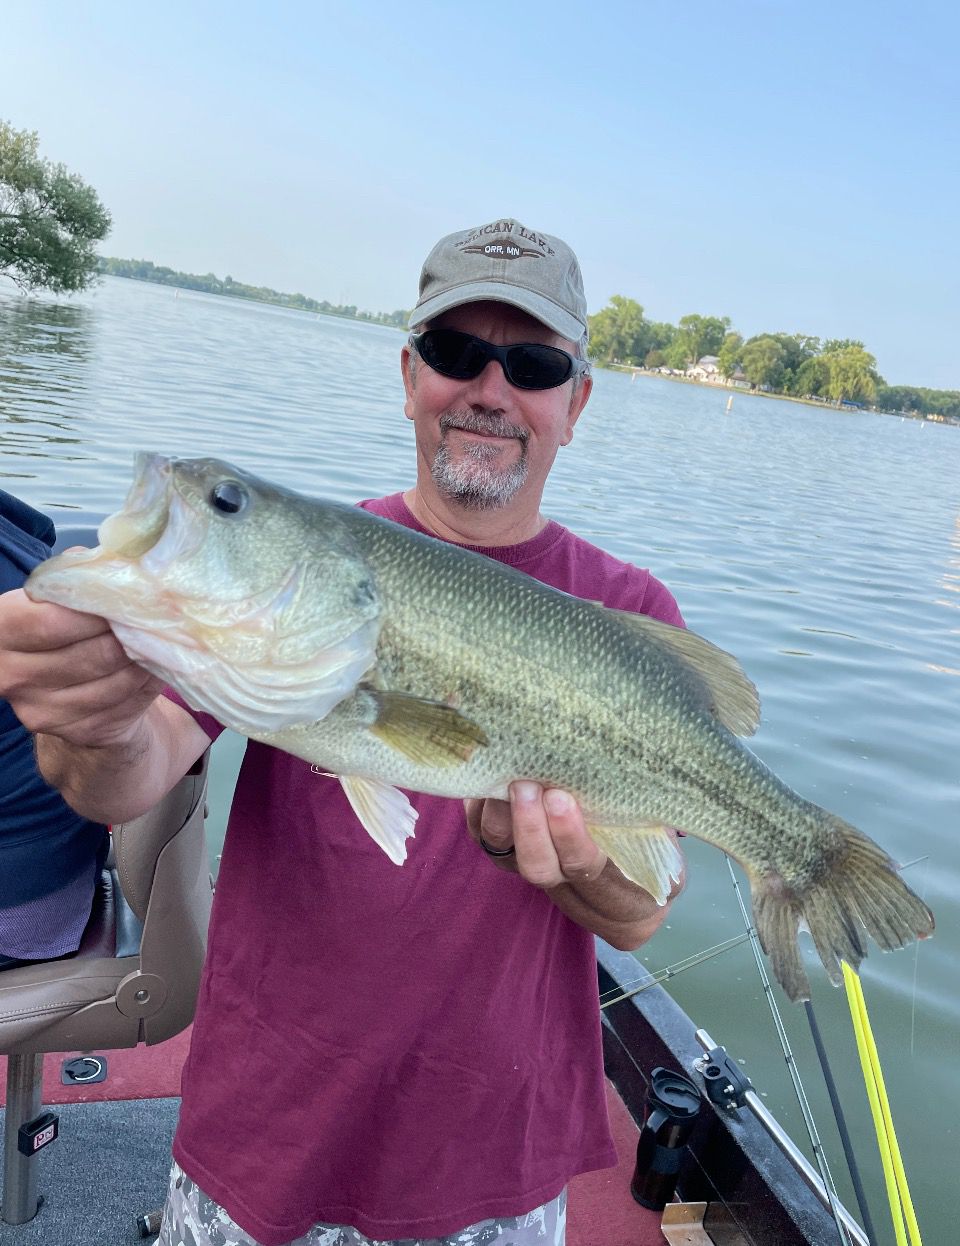 Randy Poenitsch with a largemouth bass from Fox Lake, Wisconsin. Provided by Mike Norris